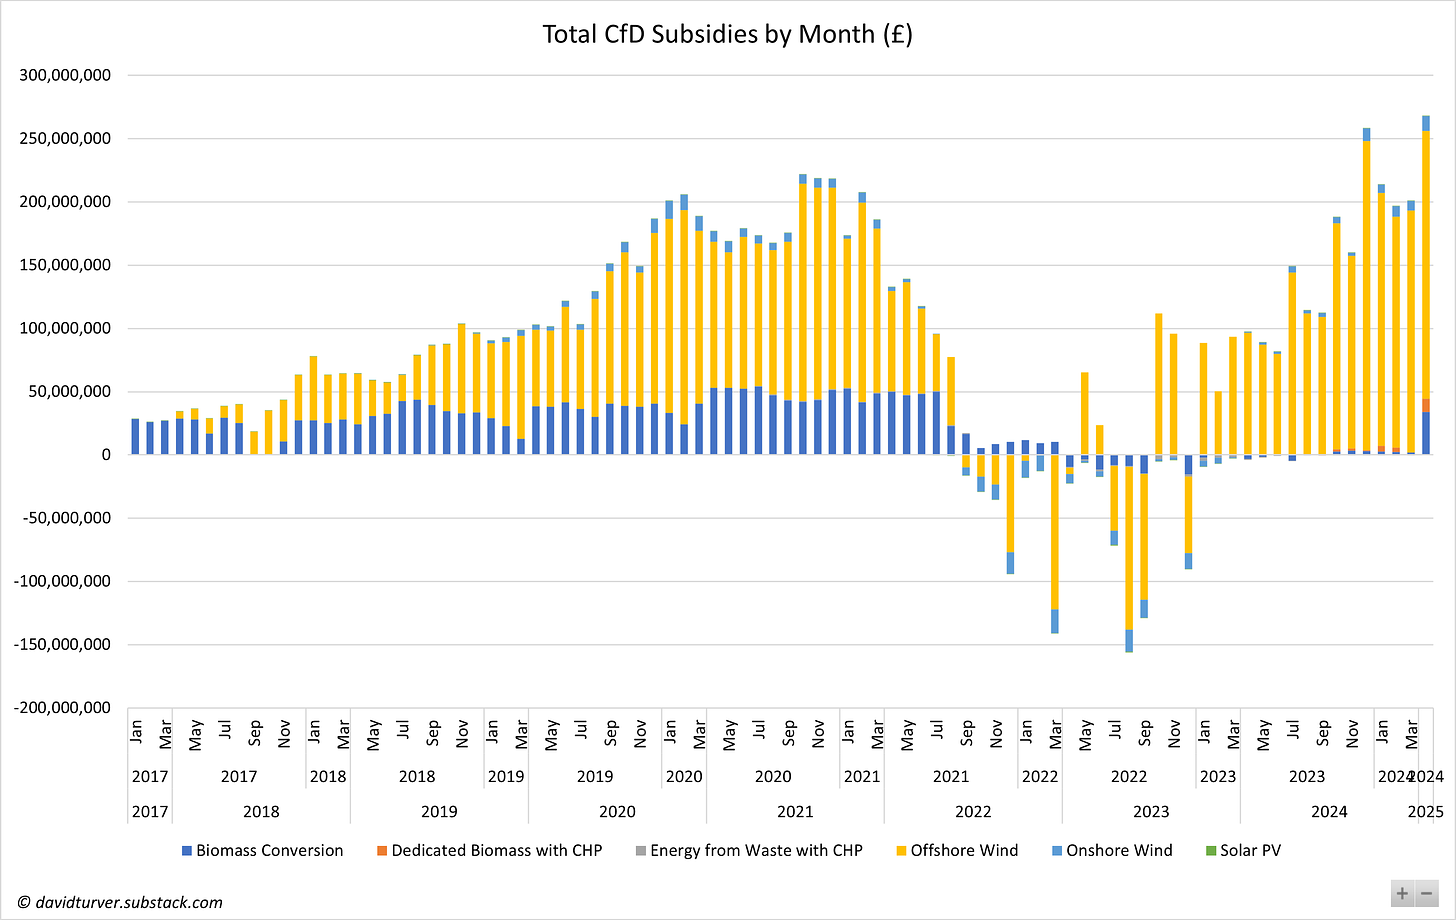 Figure 1 - Record Overall CfD Subsidies in April 2024